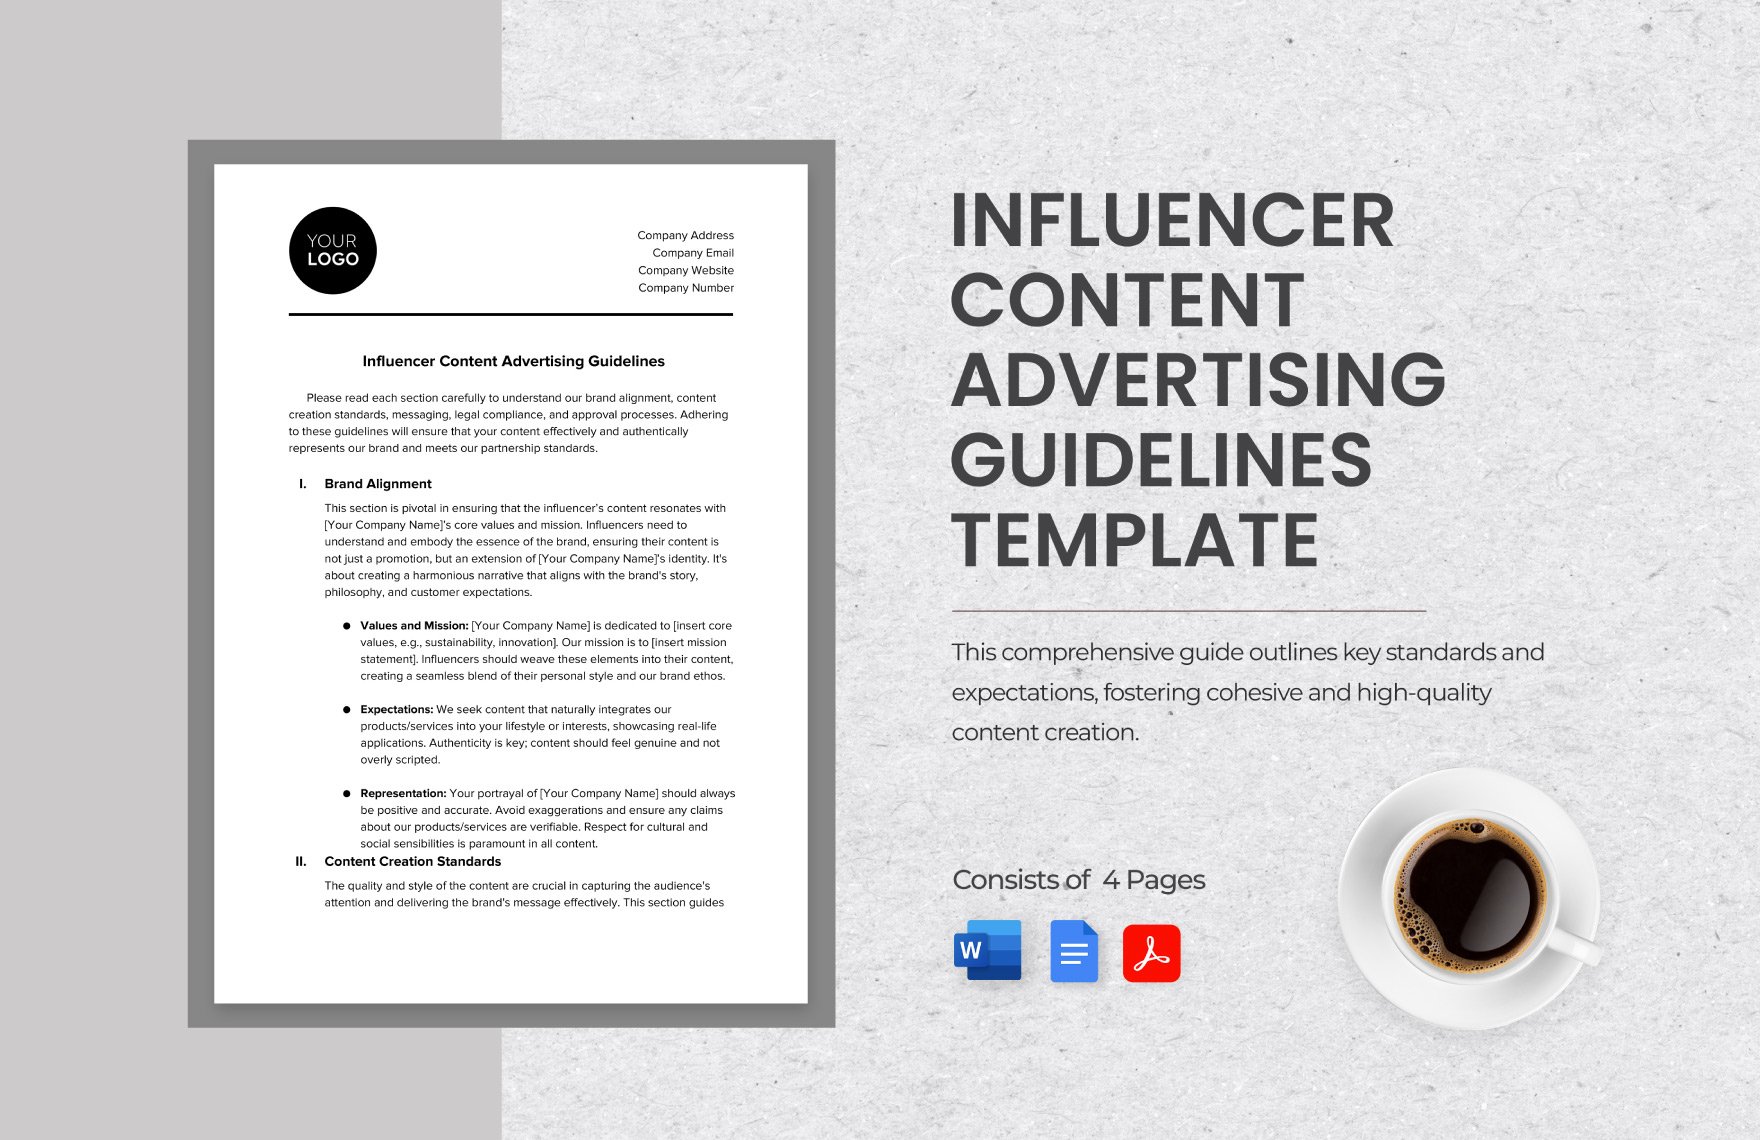 Influencer Content Advertising Guidelines Template in Word, Google Docs, PDF